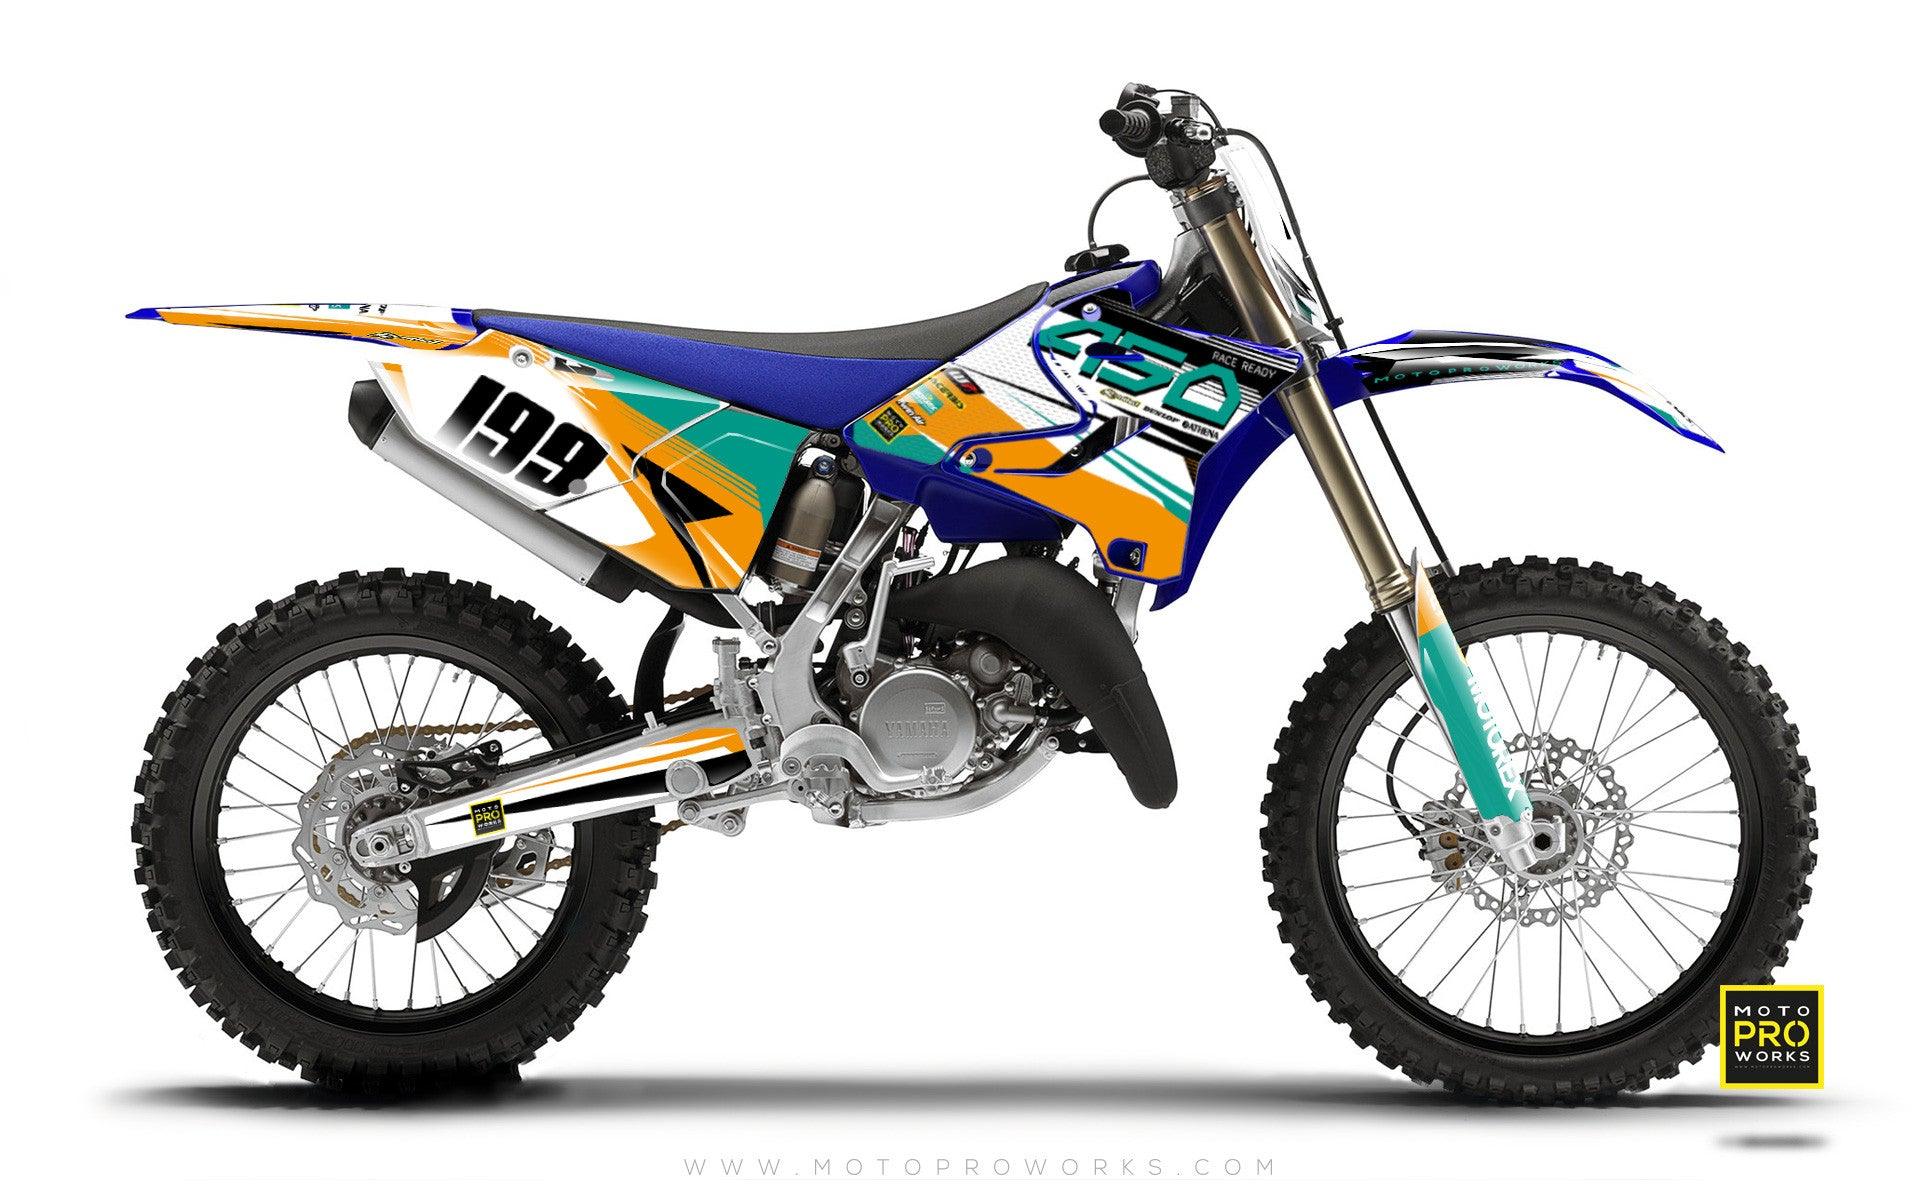 Yamaha GRAPHIC KIT - "GOFAST" (minty) - MotoProWorks | Decals and Bike Graphic kit